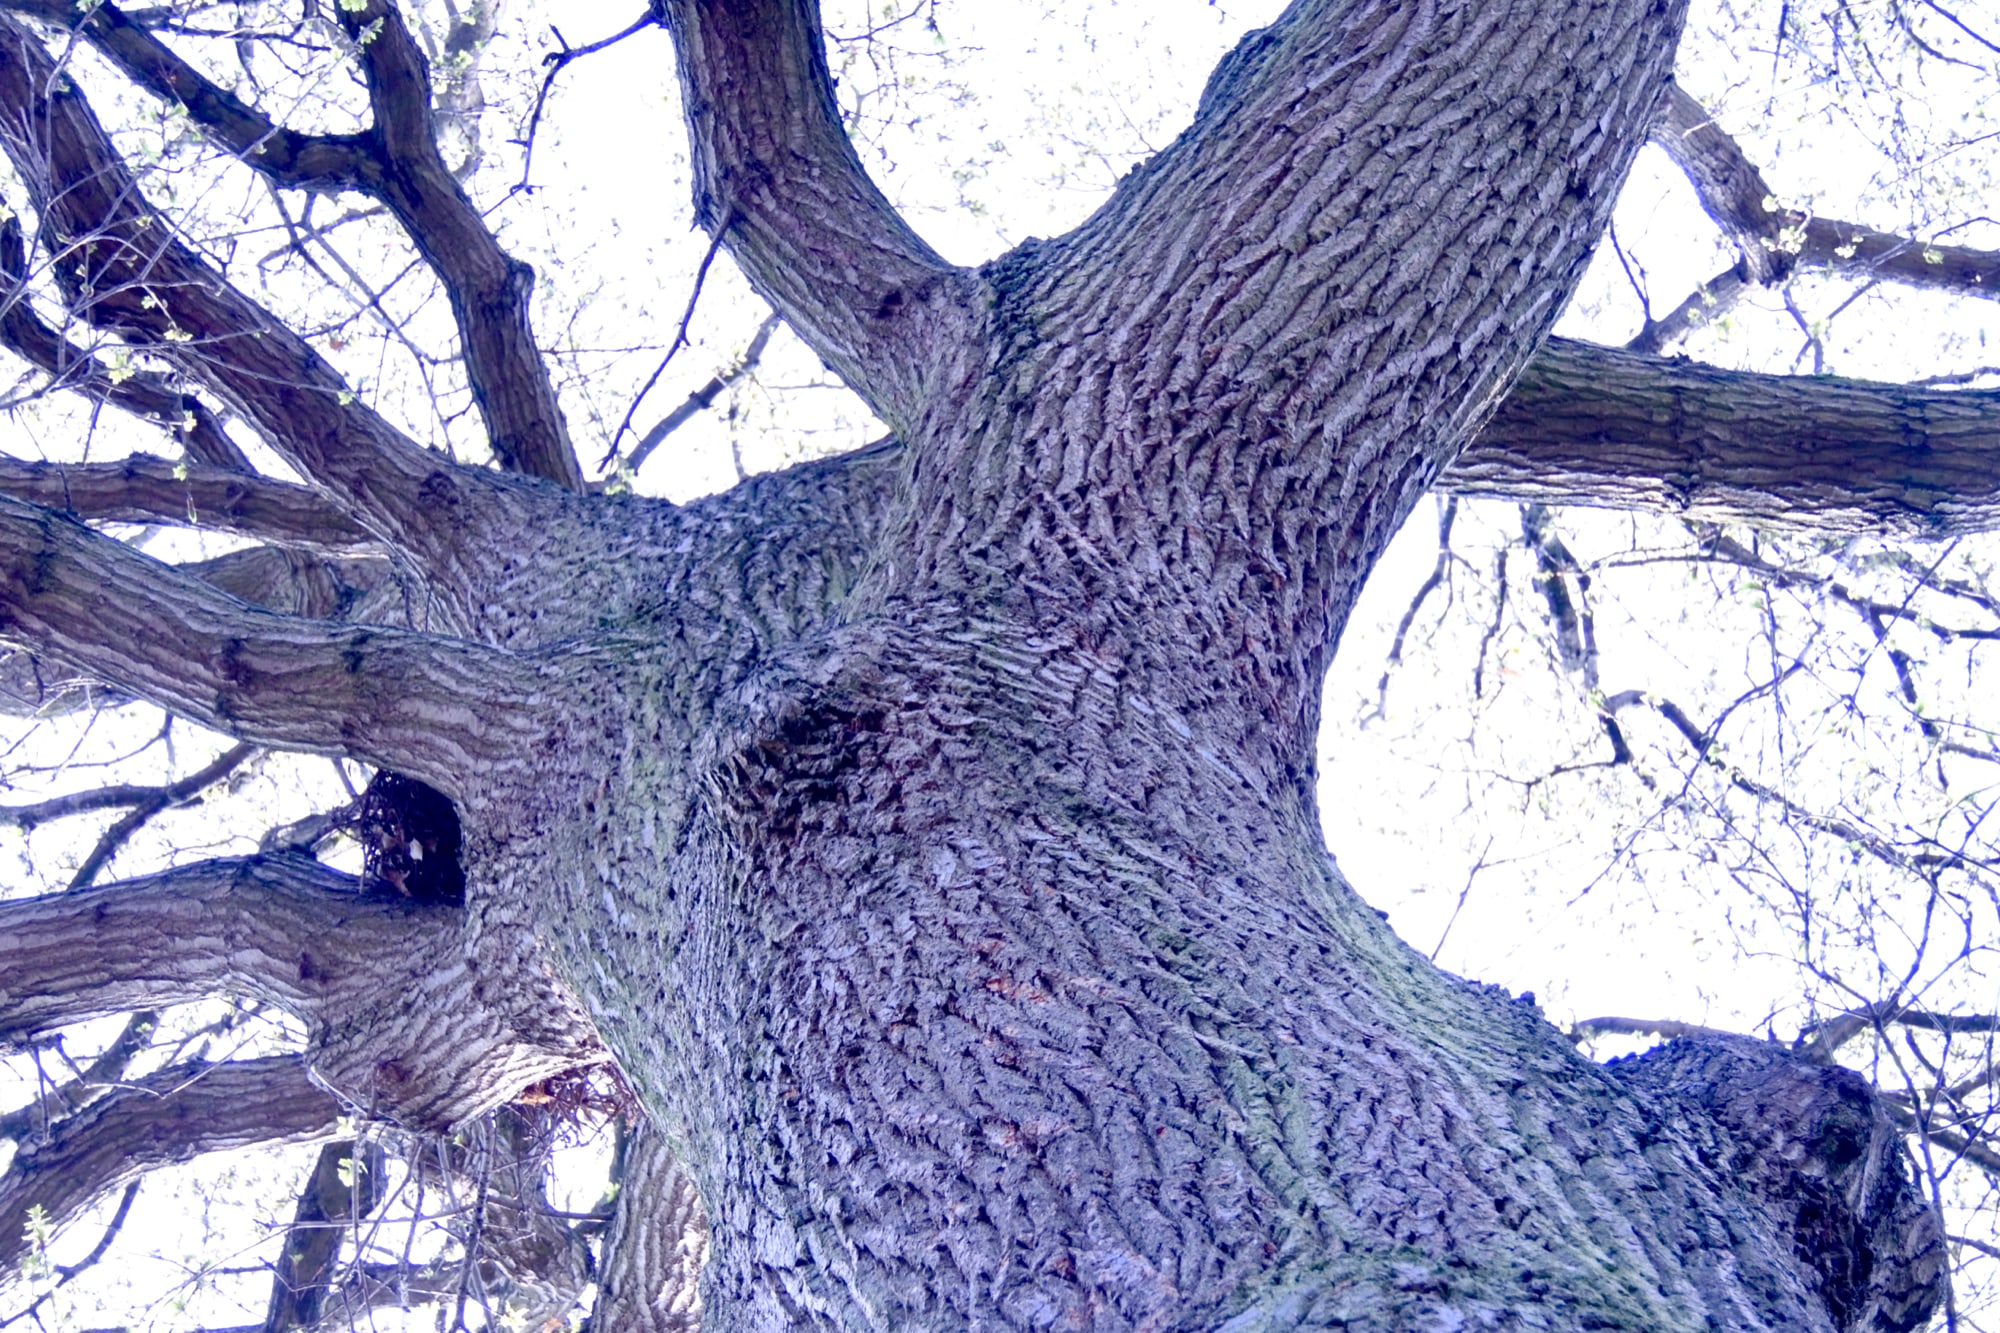 The Oak is tall and has a very large trunk